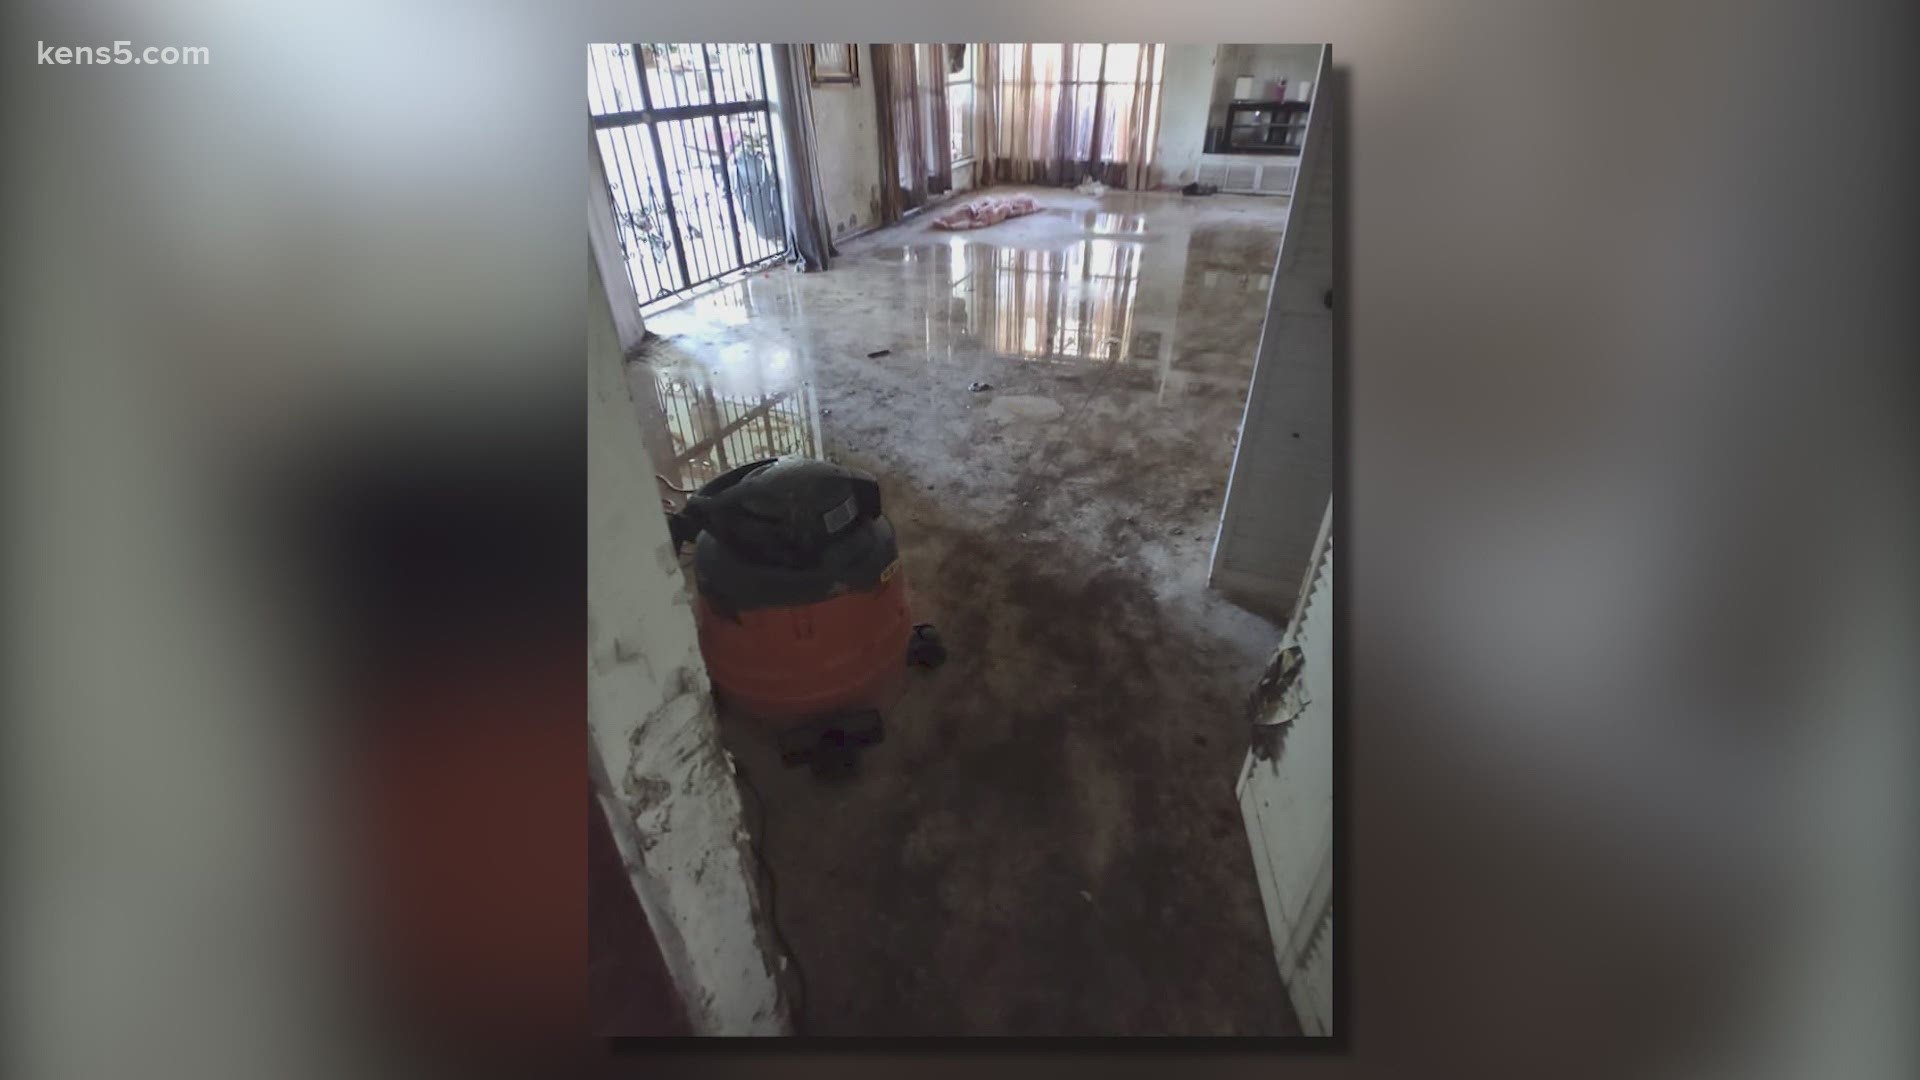 A local non-profit is now cleaning up a home that was flooded out—and they are looking for volunteers to help.